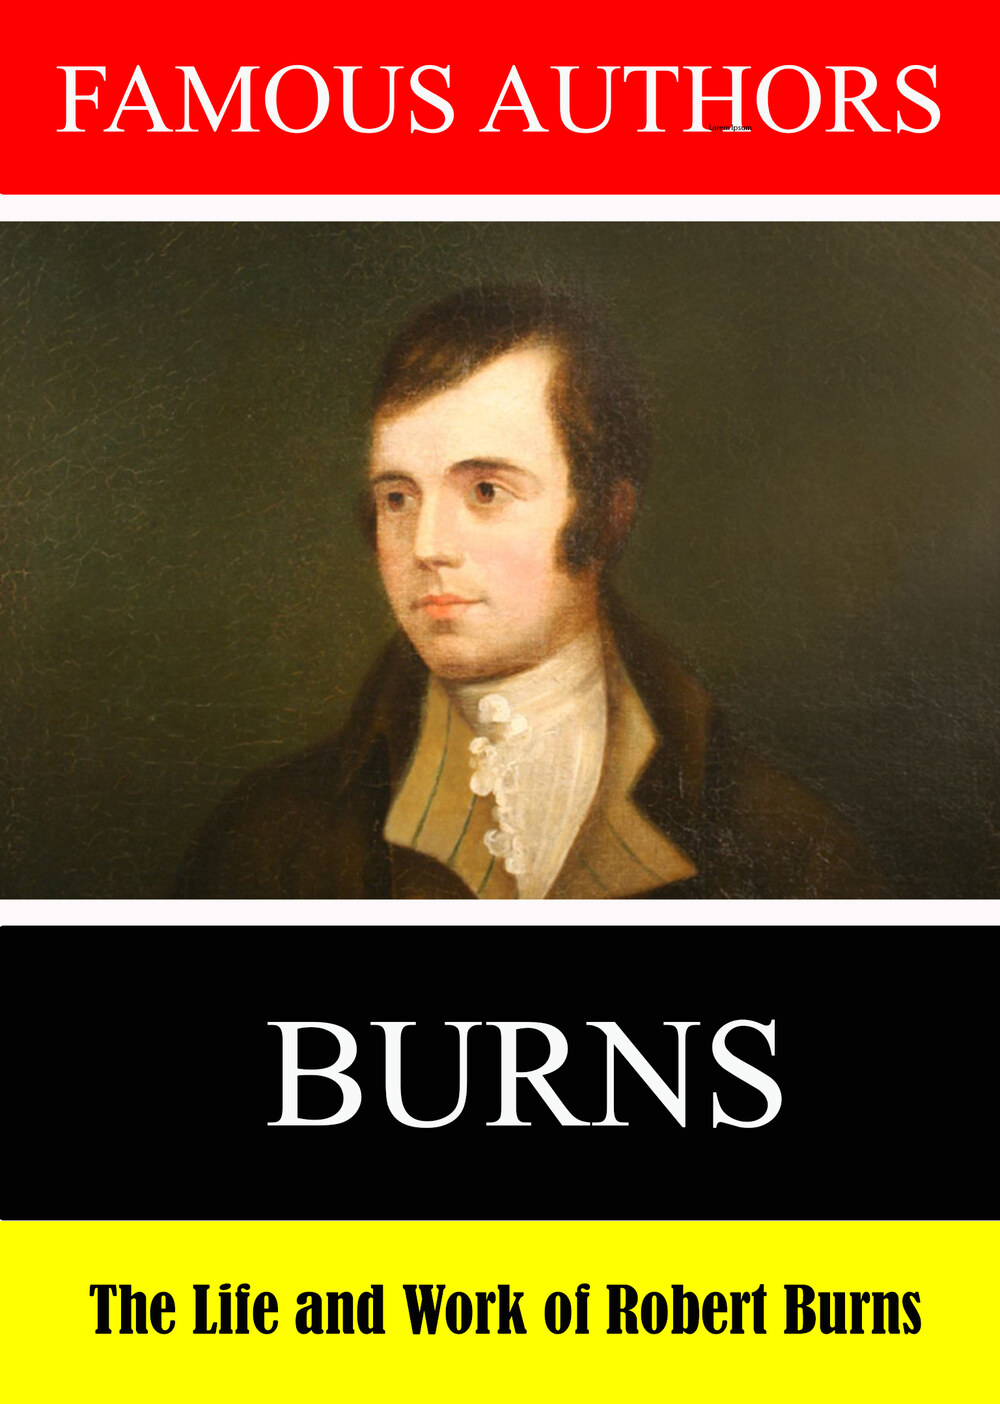 L7874 - Famous Authors: The Life and Work of Robert Burns